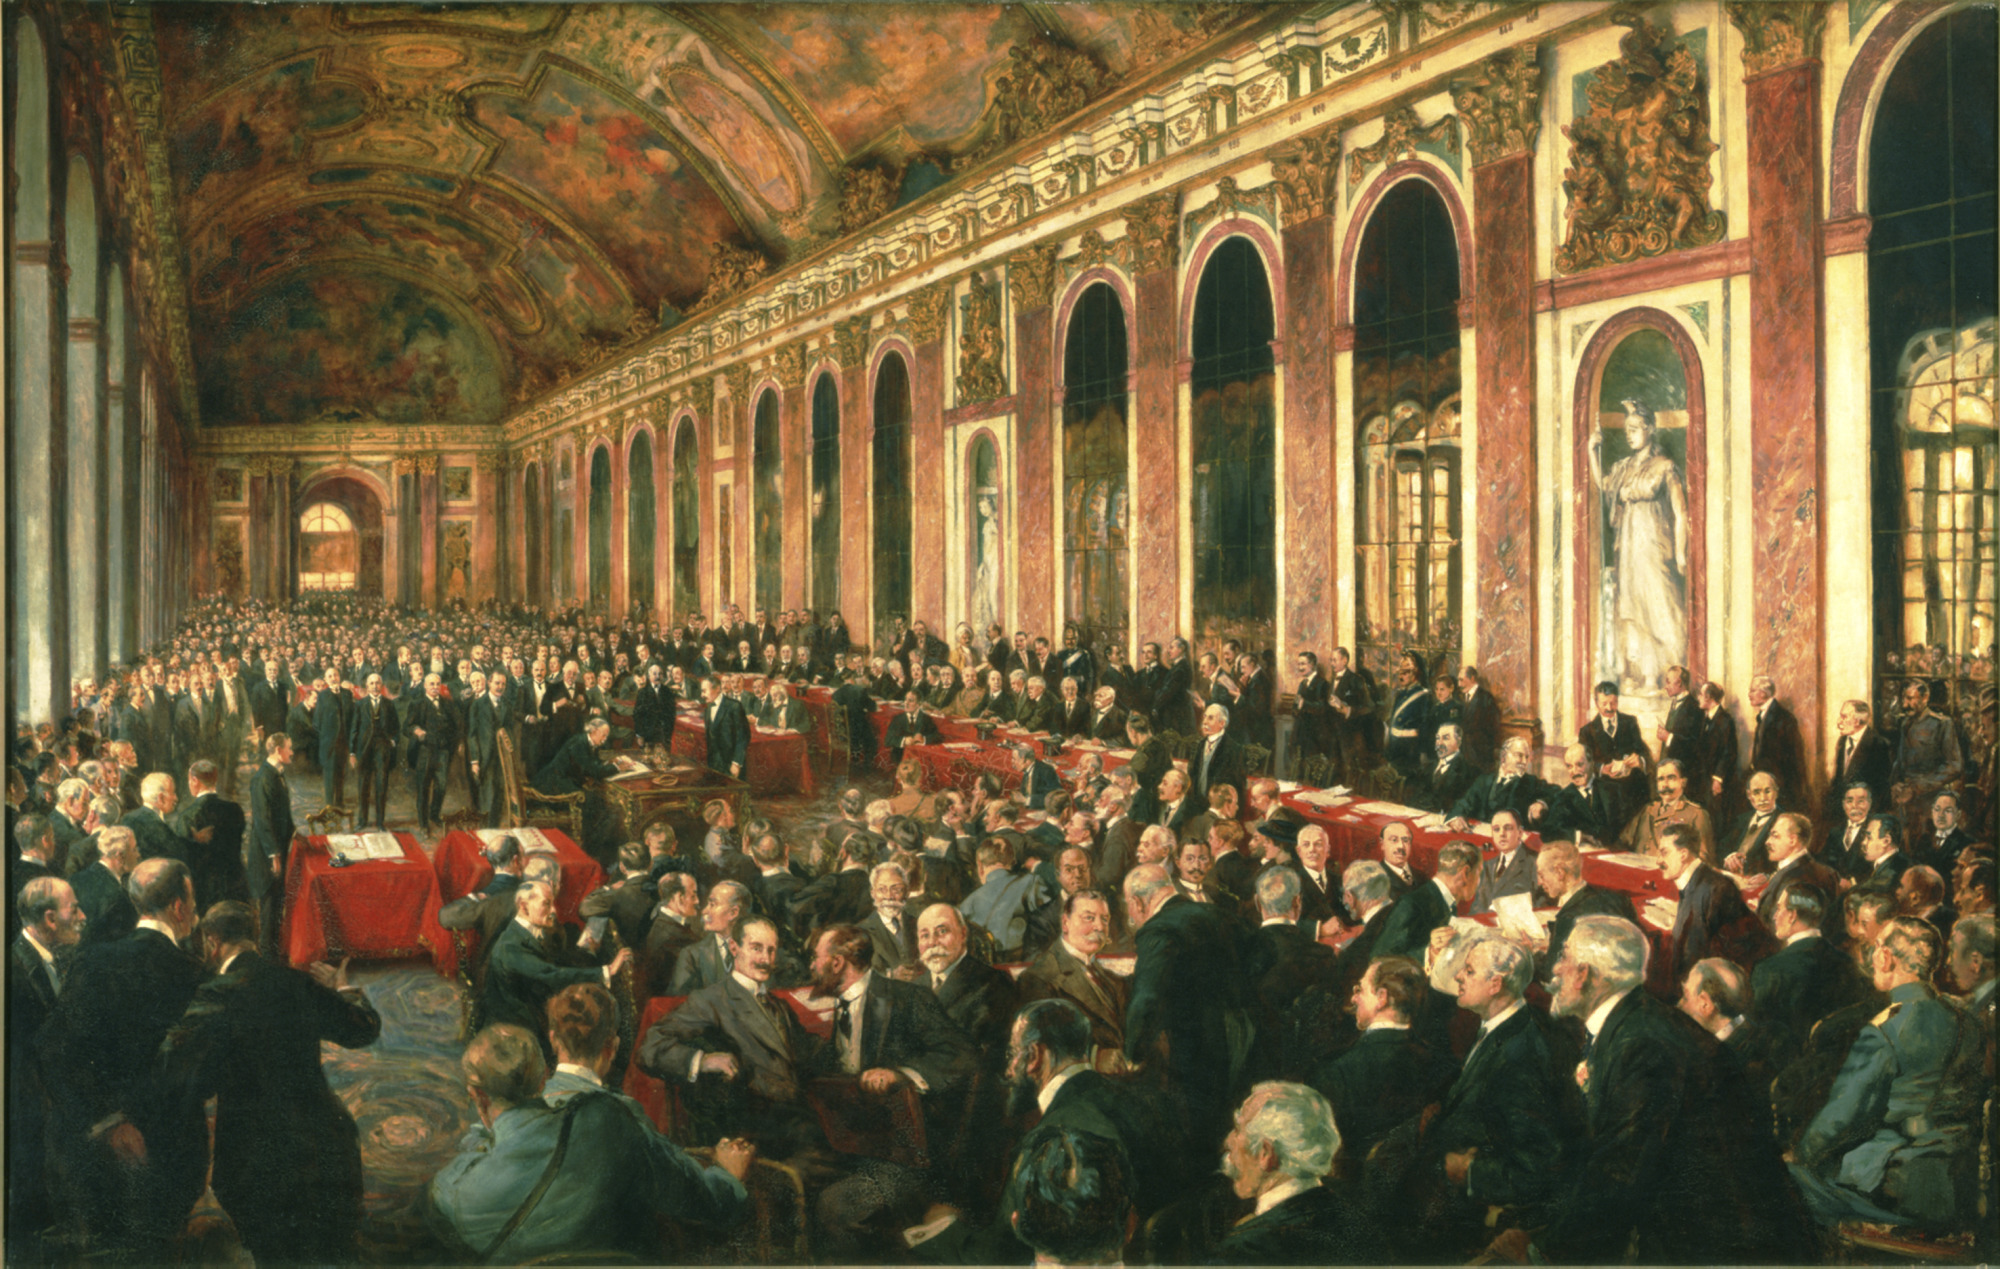 The Signing of the Treaty of Peace at Versailles, 28 June 1919, by Joseph Finnemore.